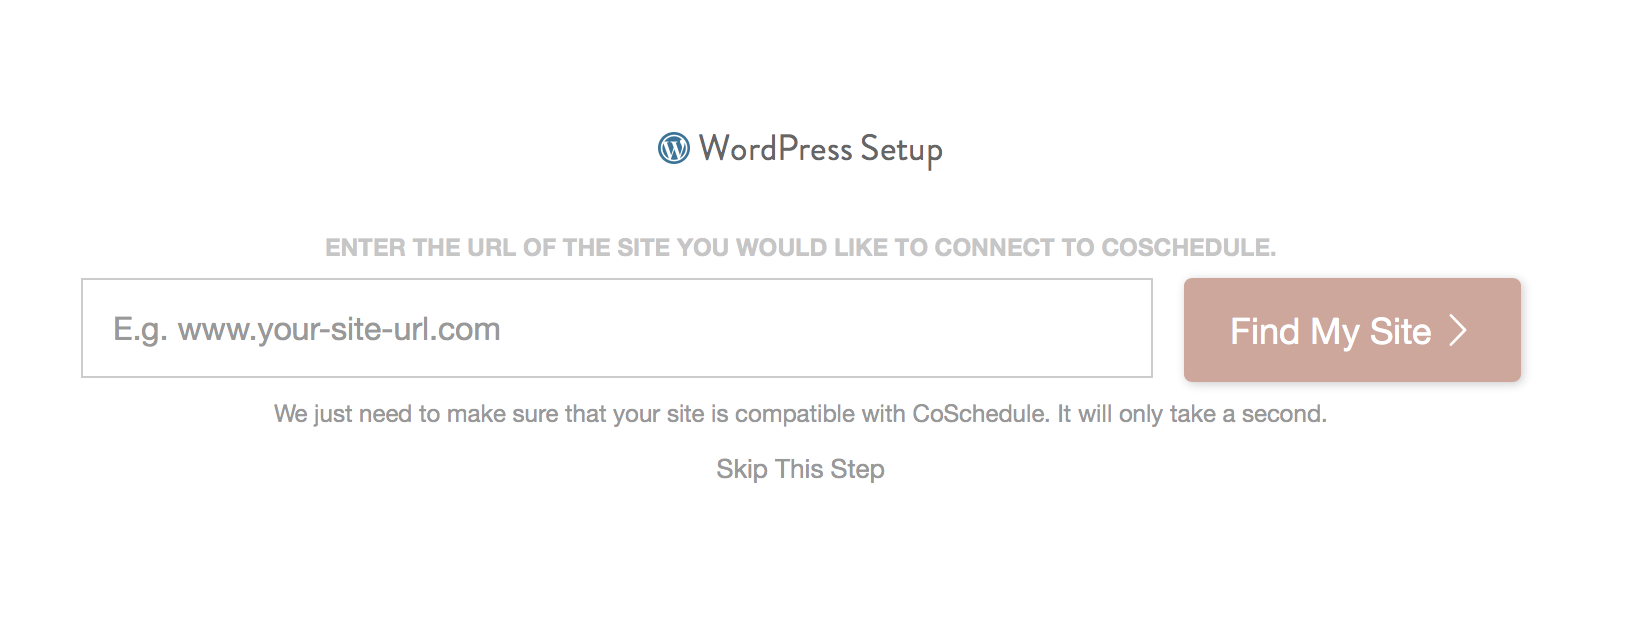 enter site URL to connect to coschedule on wordpress